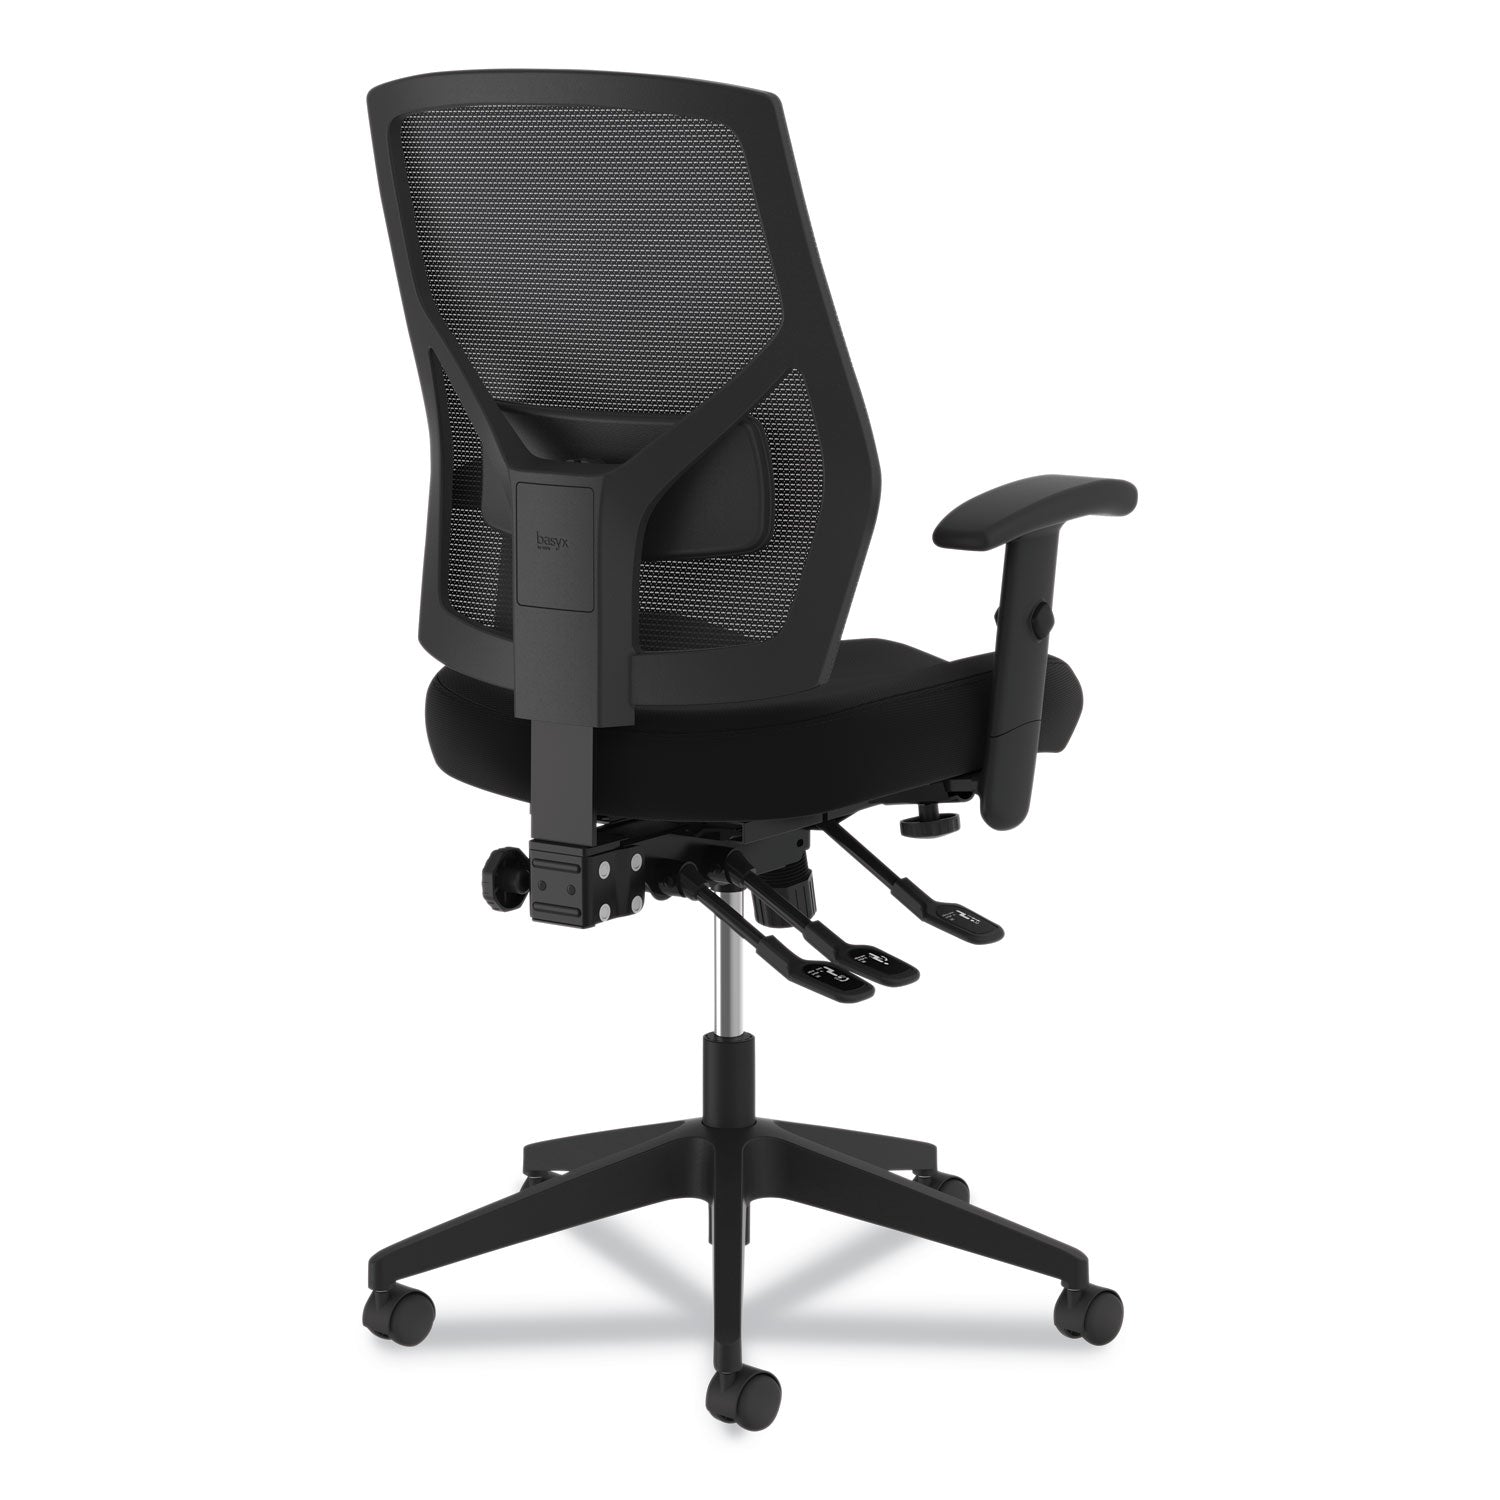 vl582-high-back-task-chair-supports-up-to-250-lb-19-to-22-seat-height-black_bsxvl582es10t - 5